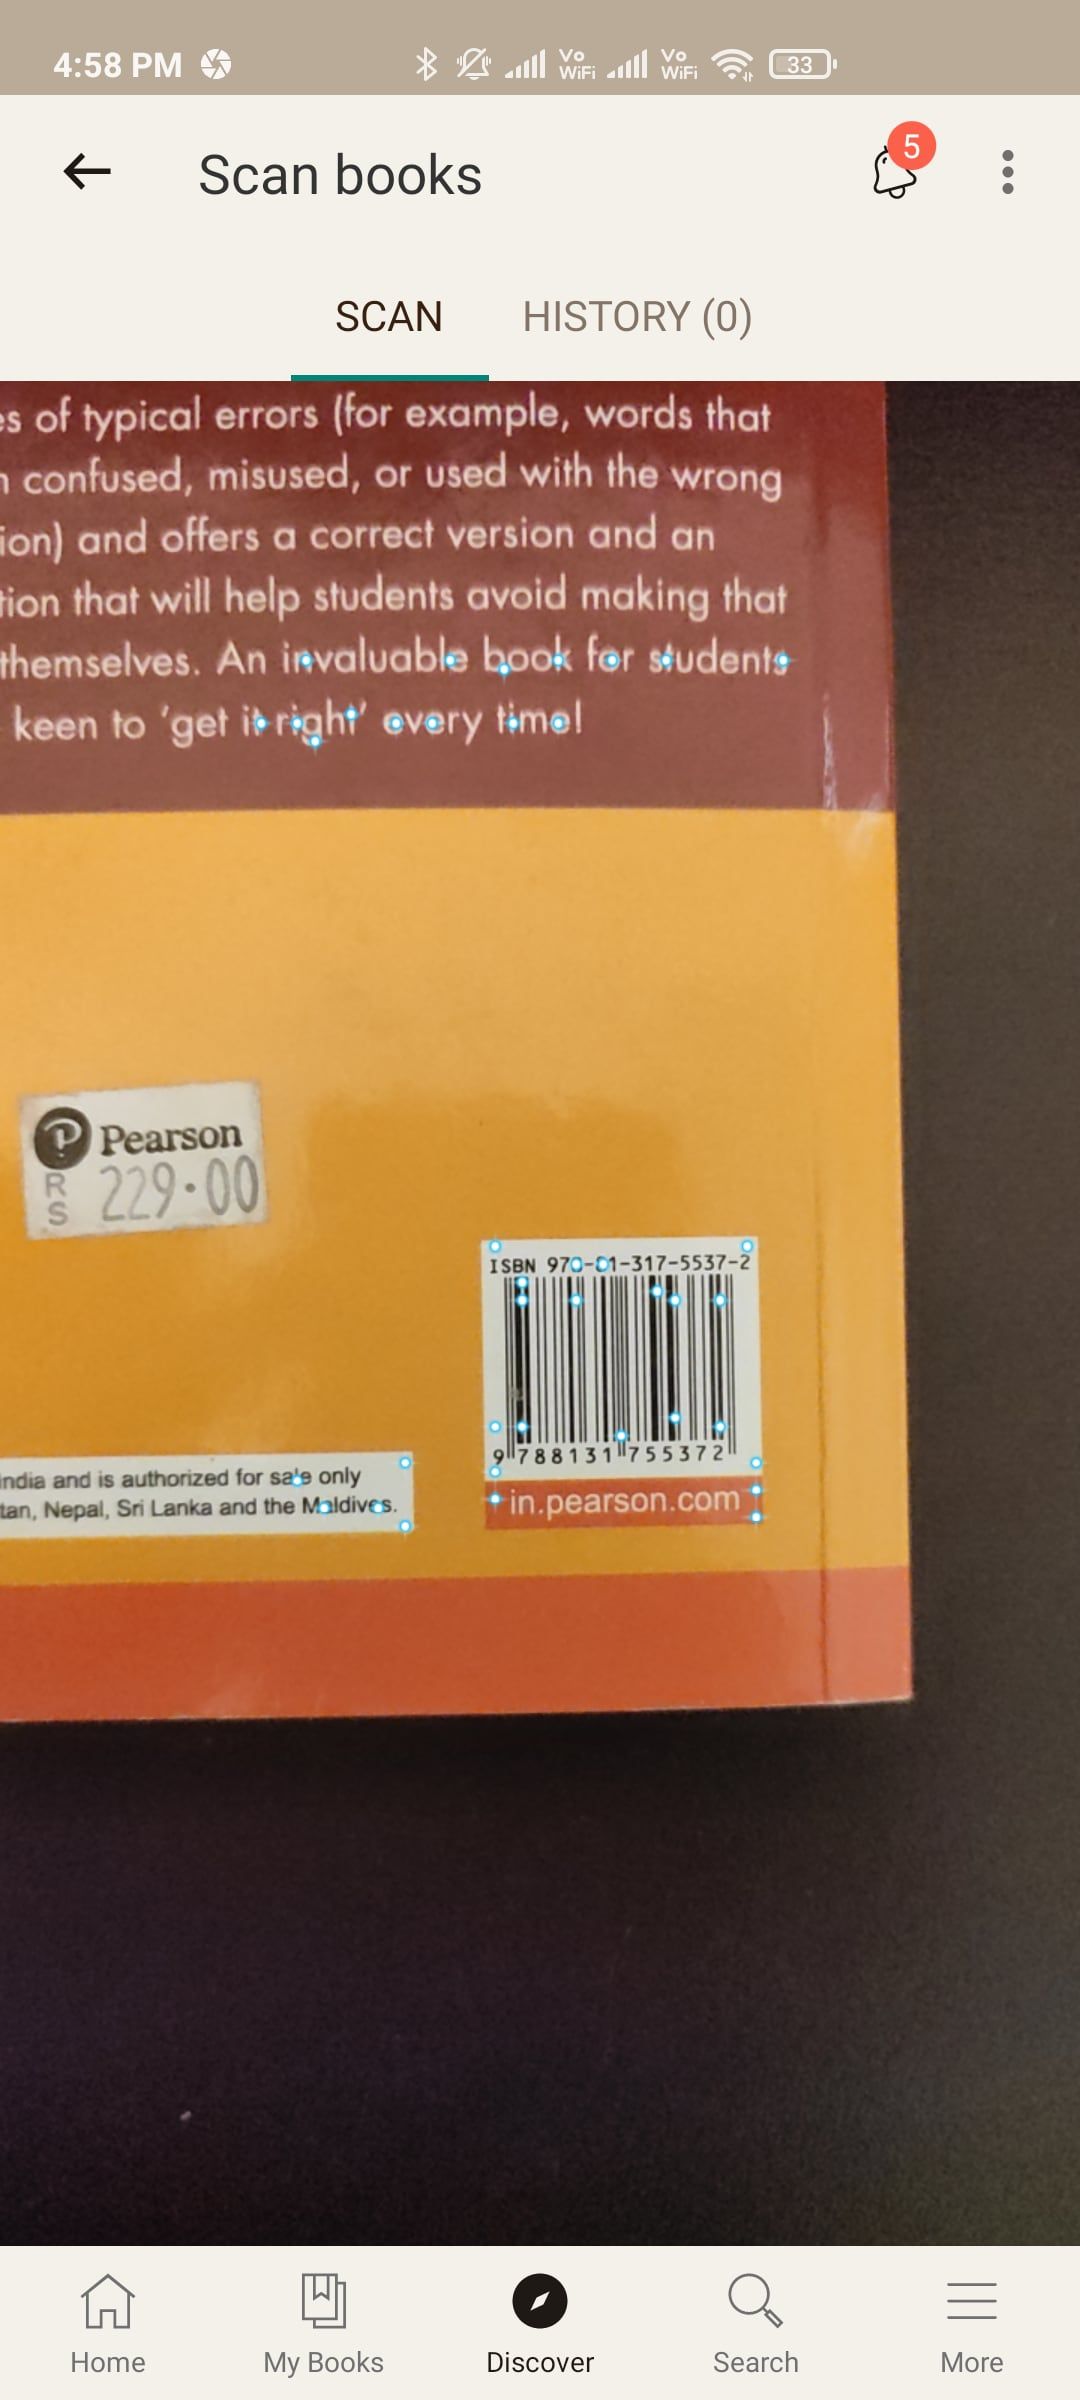 Scanning barcode in Goodreads